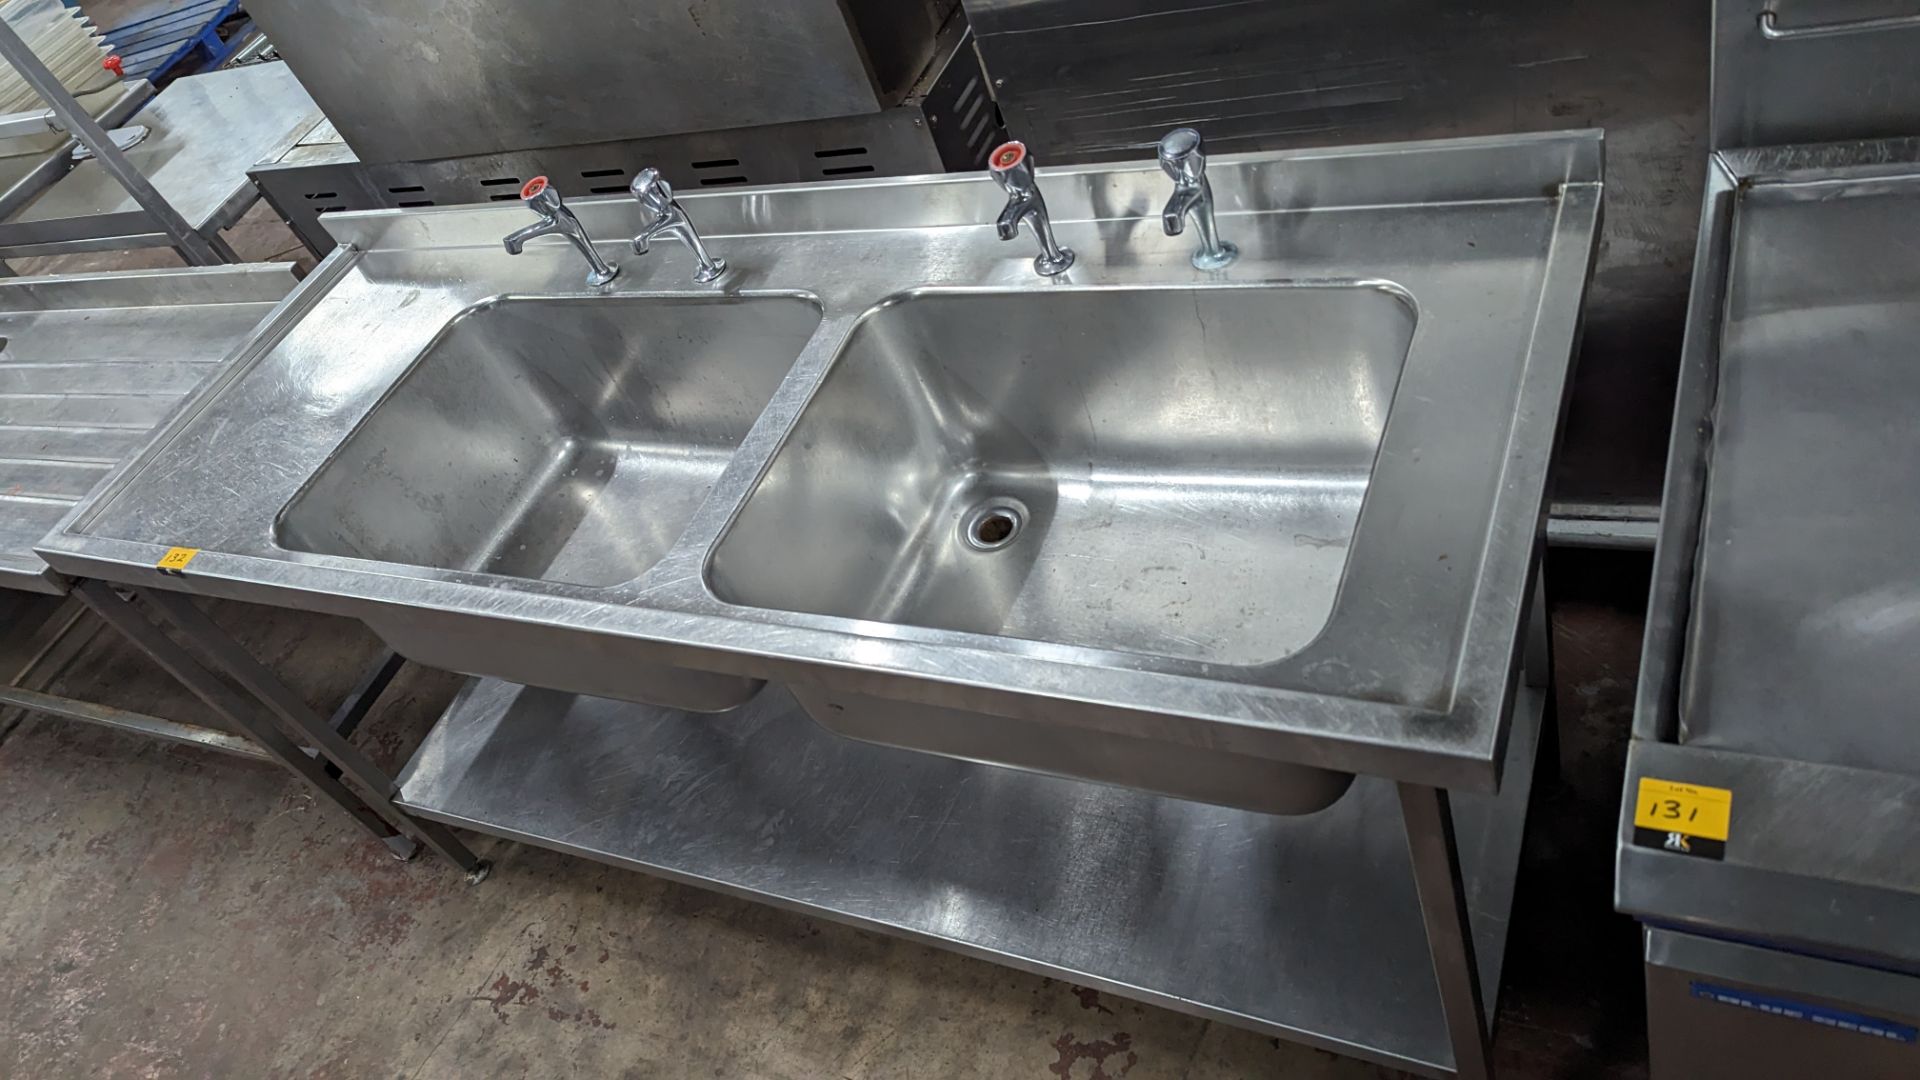 Large stainless steel floor standing twin bowl sink arrangement with built-in drainer & a pair of ta - Image 3 of 4